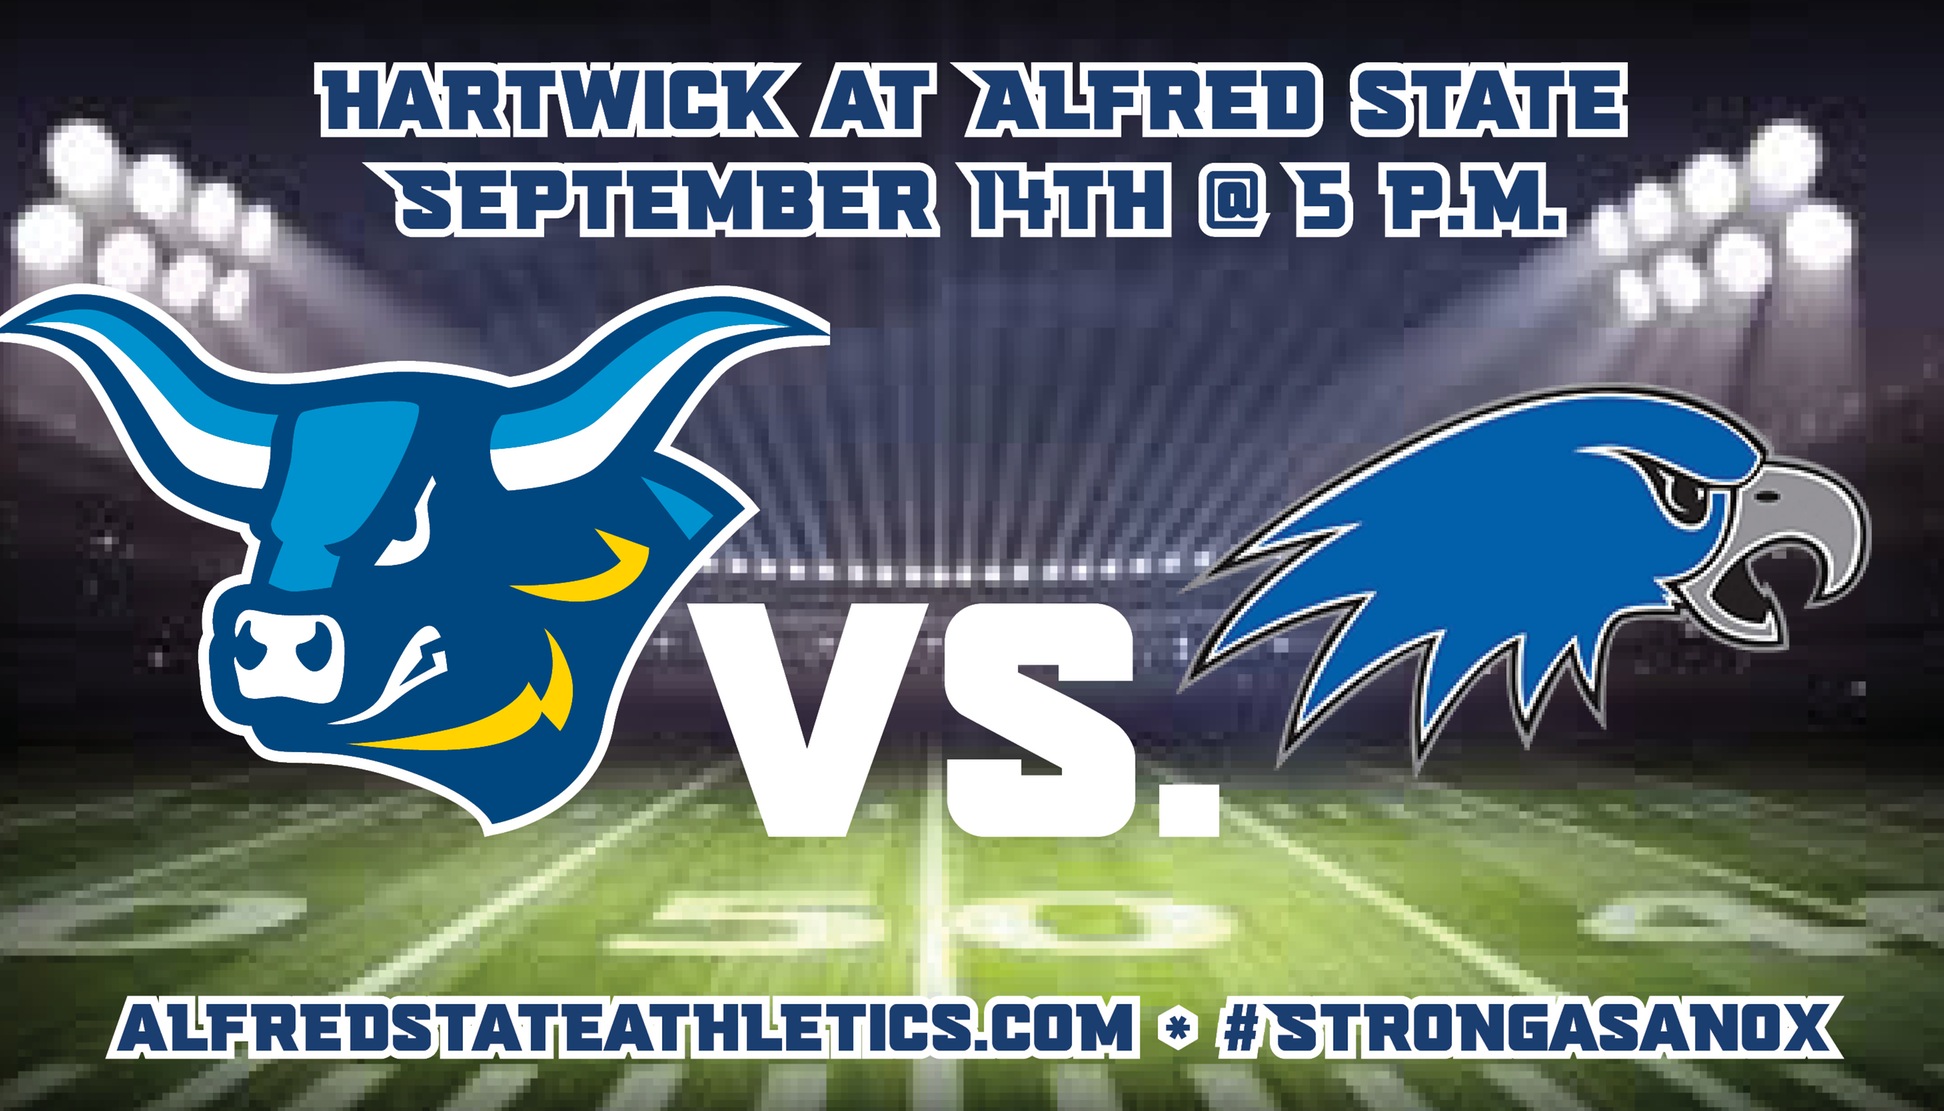 Alfred State takes on Hartwick on Sept. 14th in the home opener for the Pioneers